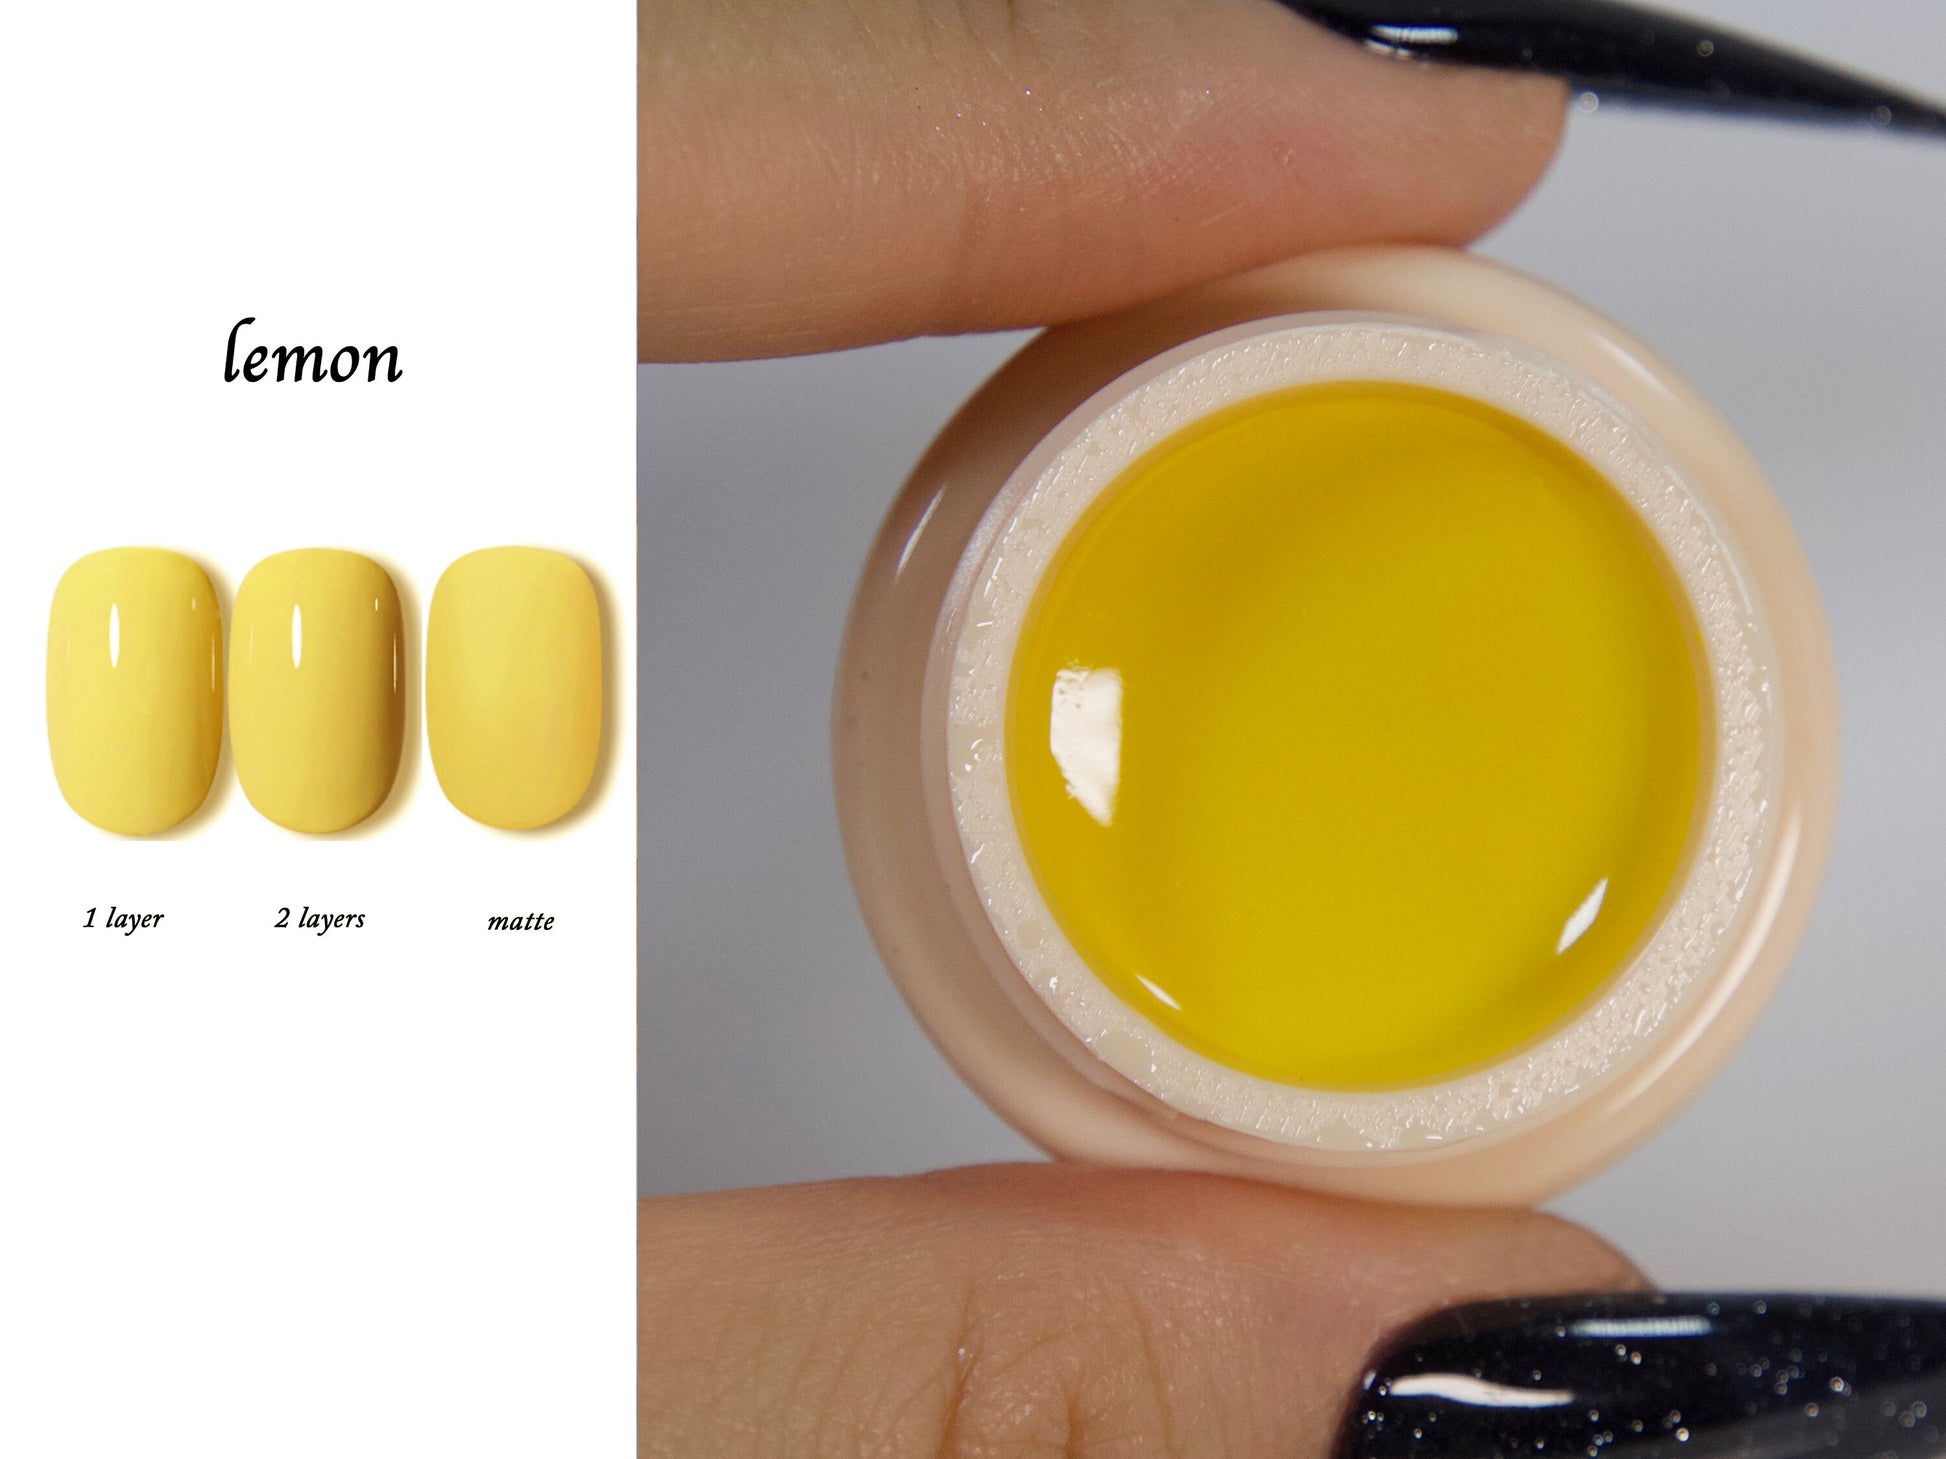 5g Solid Jelly UV Gel Nail Art /Bright Yellow Sunflower Lemon Pudding UV Gels Creamy Gel Manicure Pedicure Nails Polish Happy Summer Color